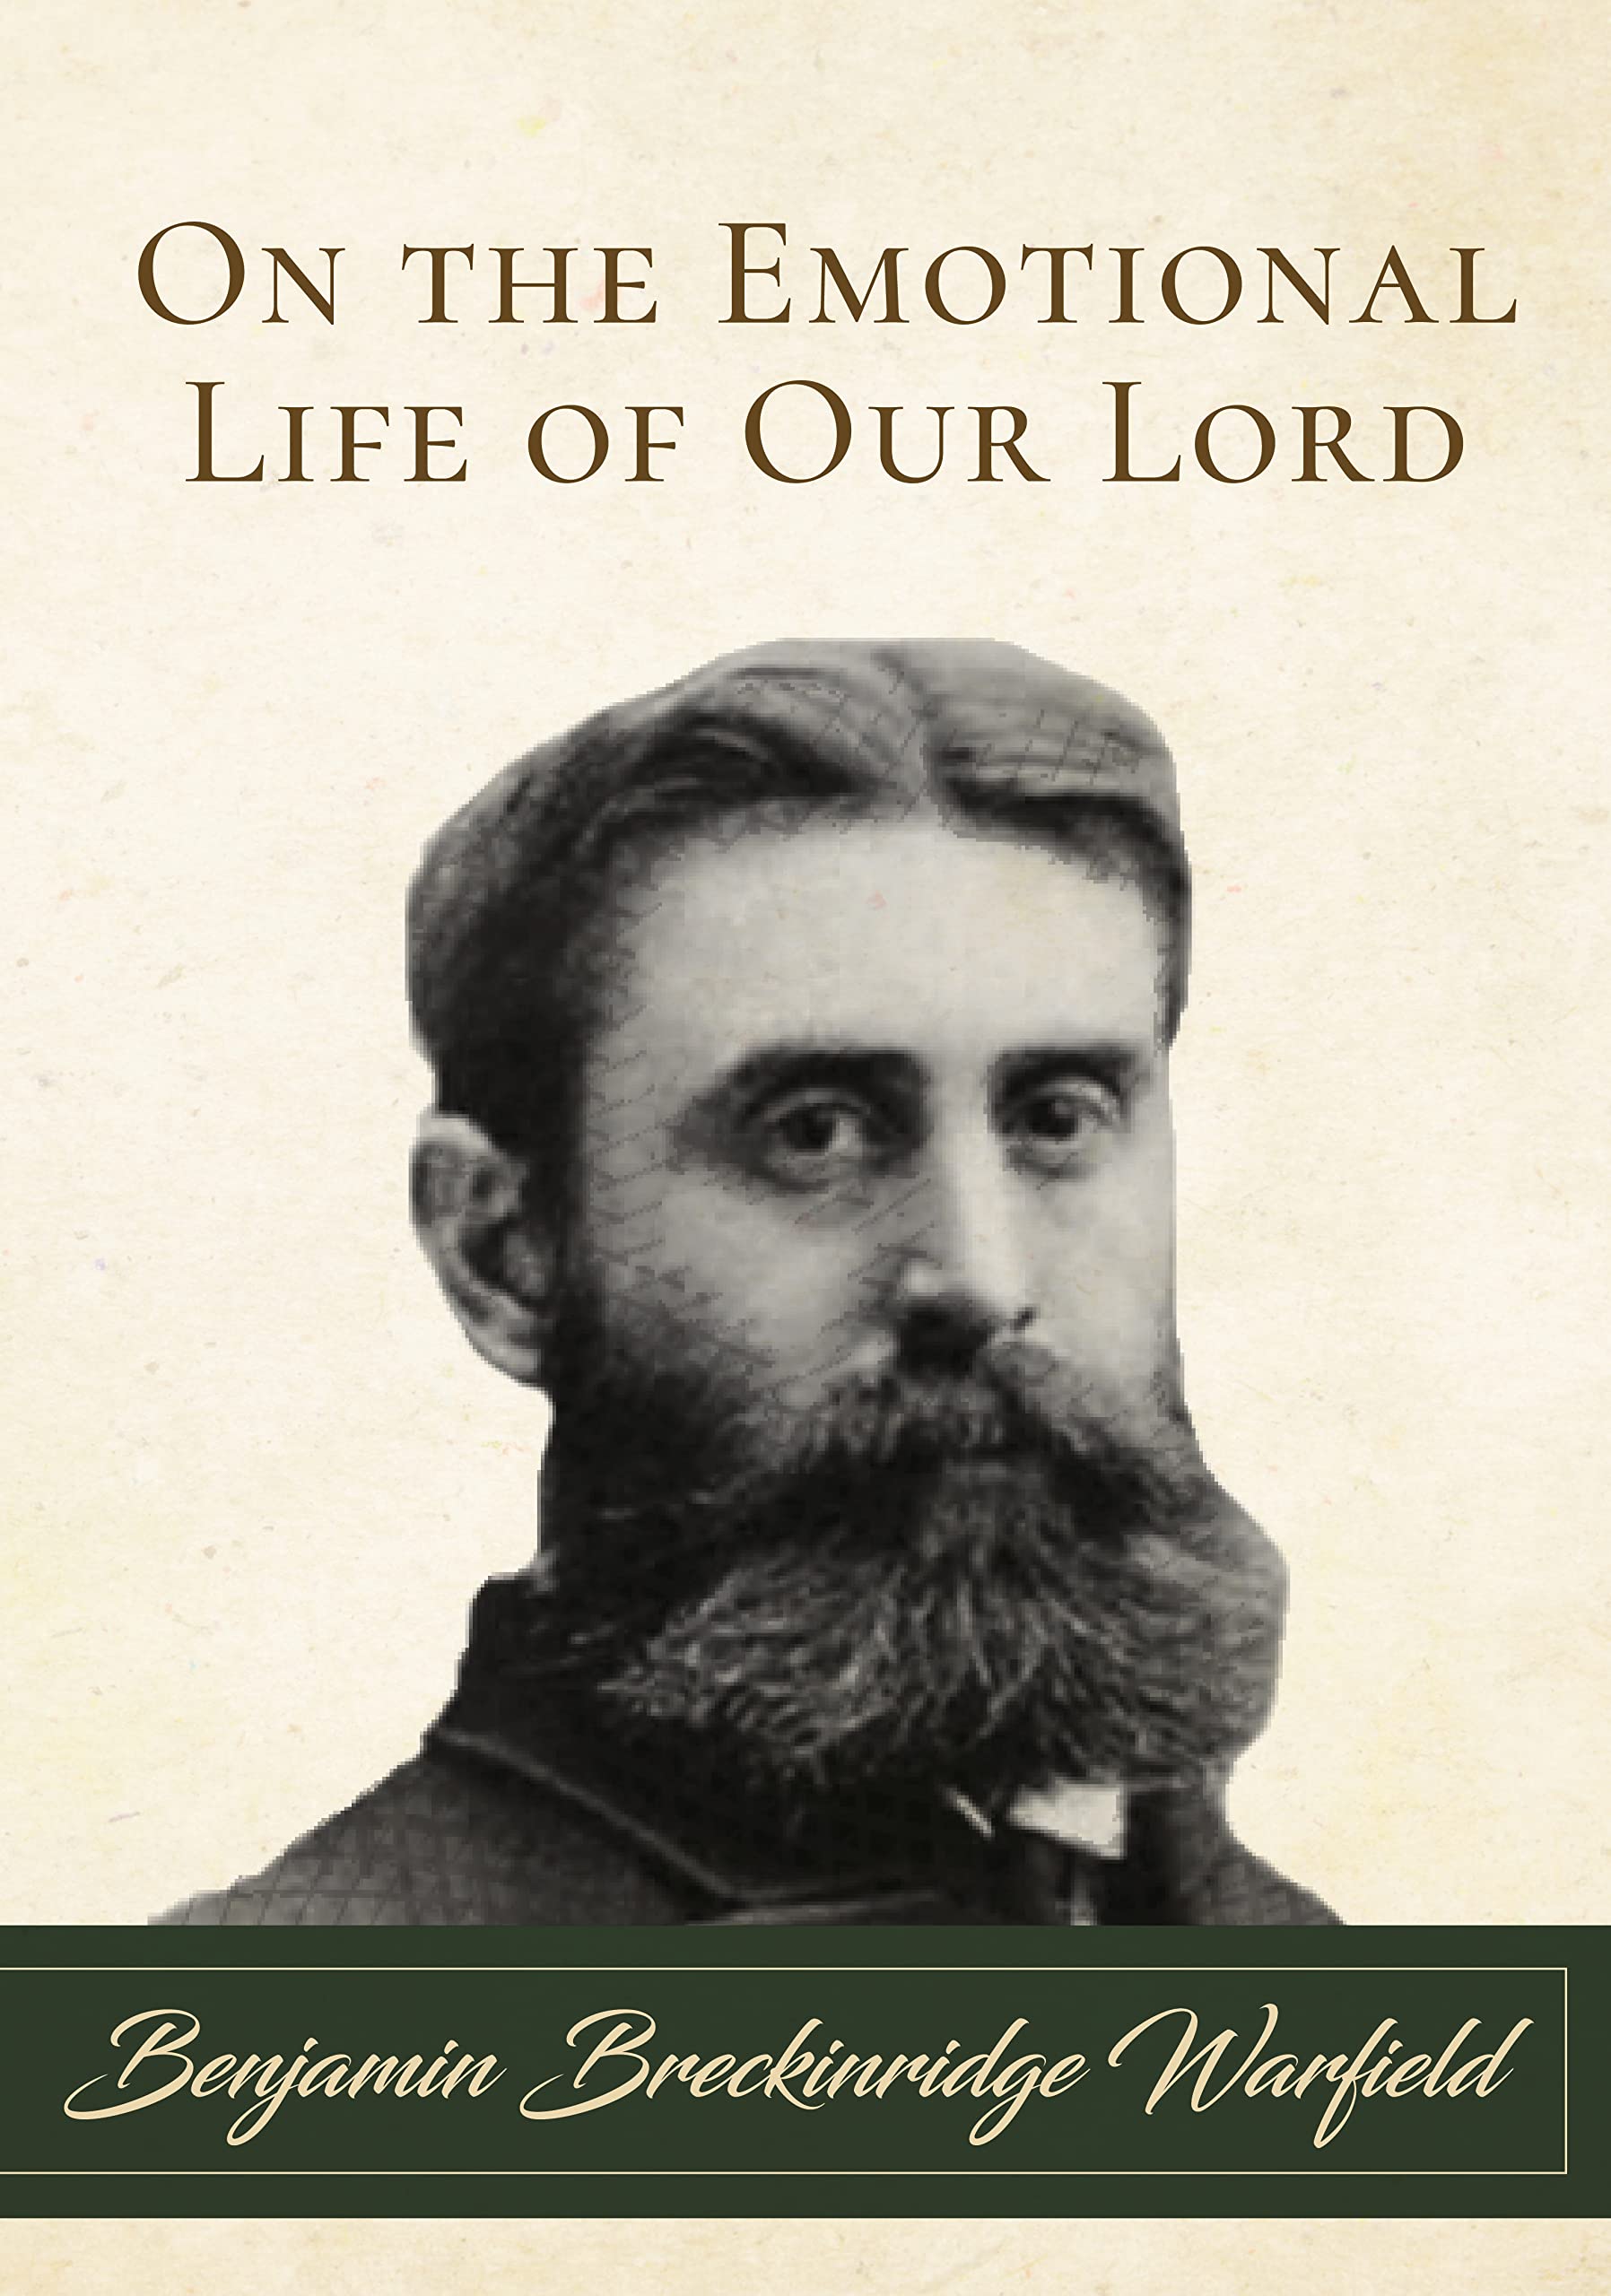 Book Notice: ON THE EMOTIONAL LIFE OF OUR LORD, by Benjamin Breckinridge Warfield